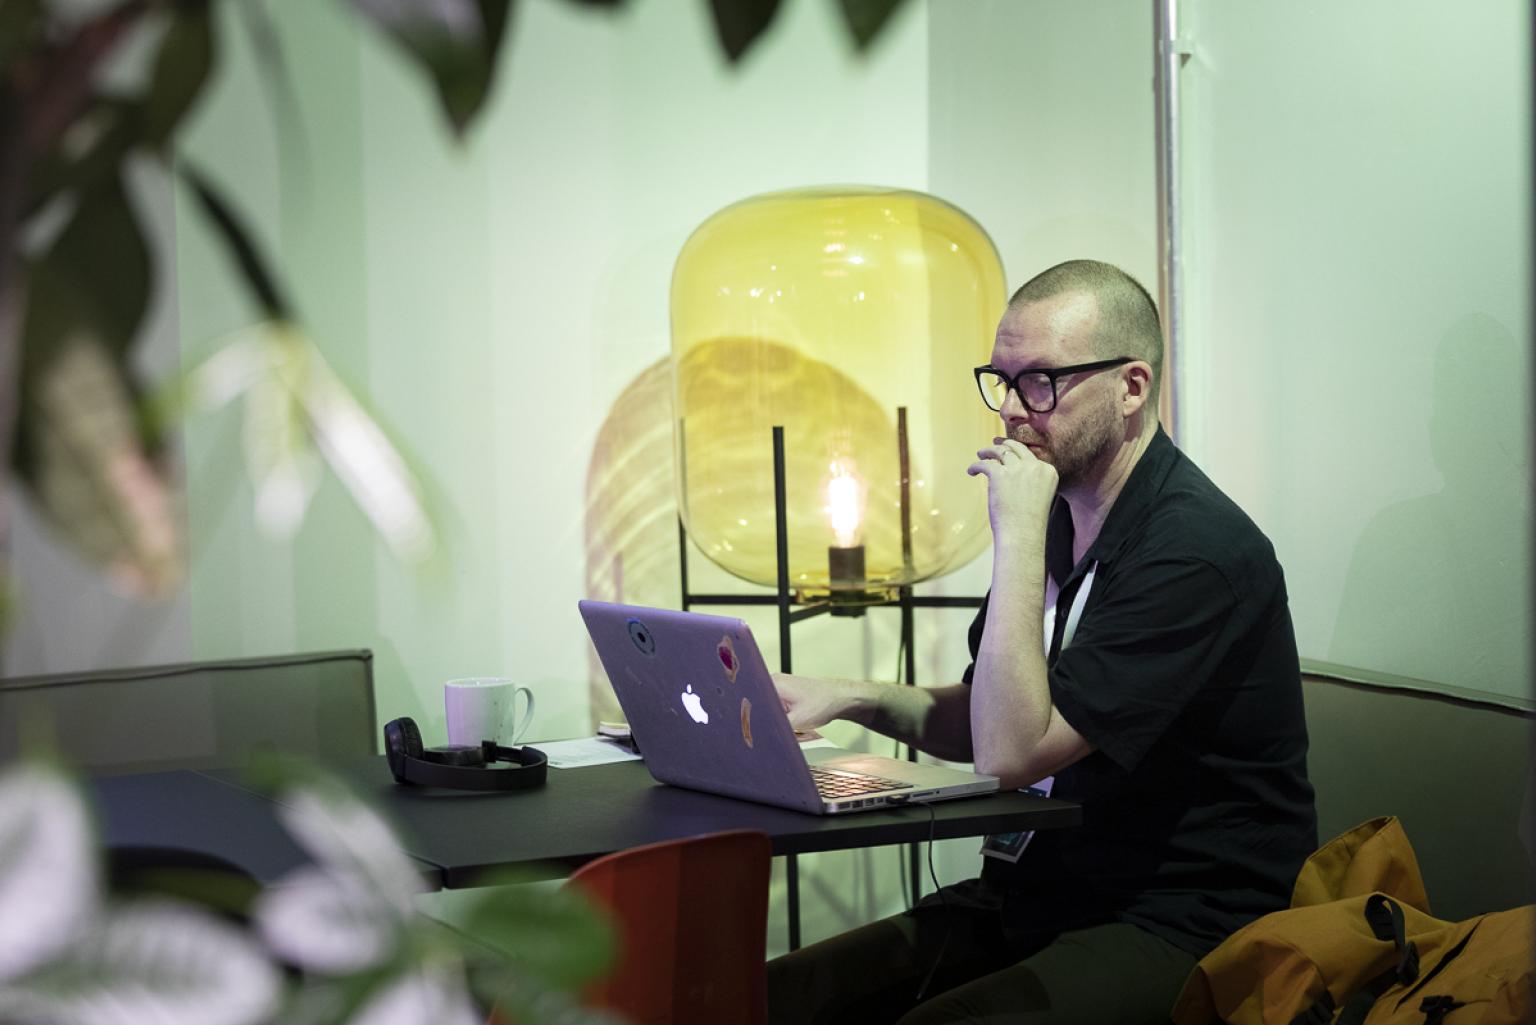 A man sits at a table framed by plants and a giant yellow glass lamp, looking at his laptop.